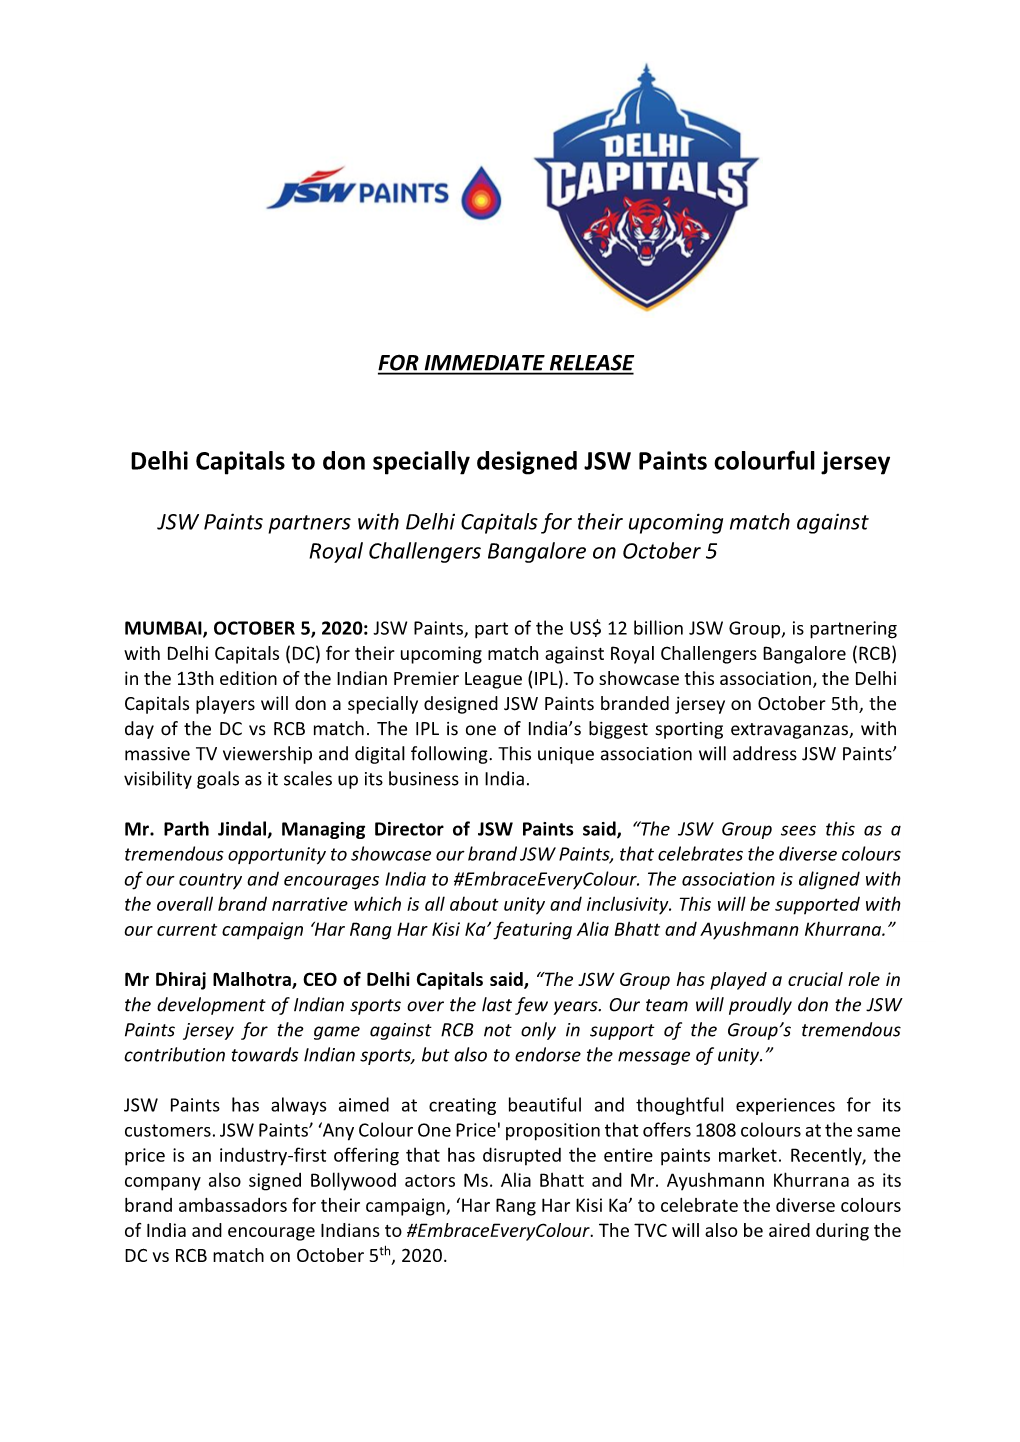 Delhi Capitals to Don Specially Designed JSW Paints Colourful Jersey